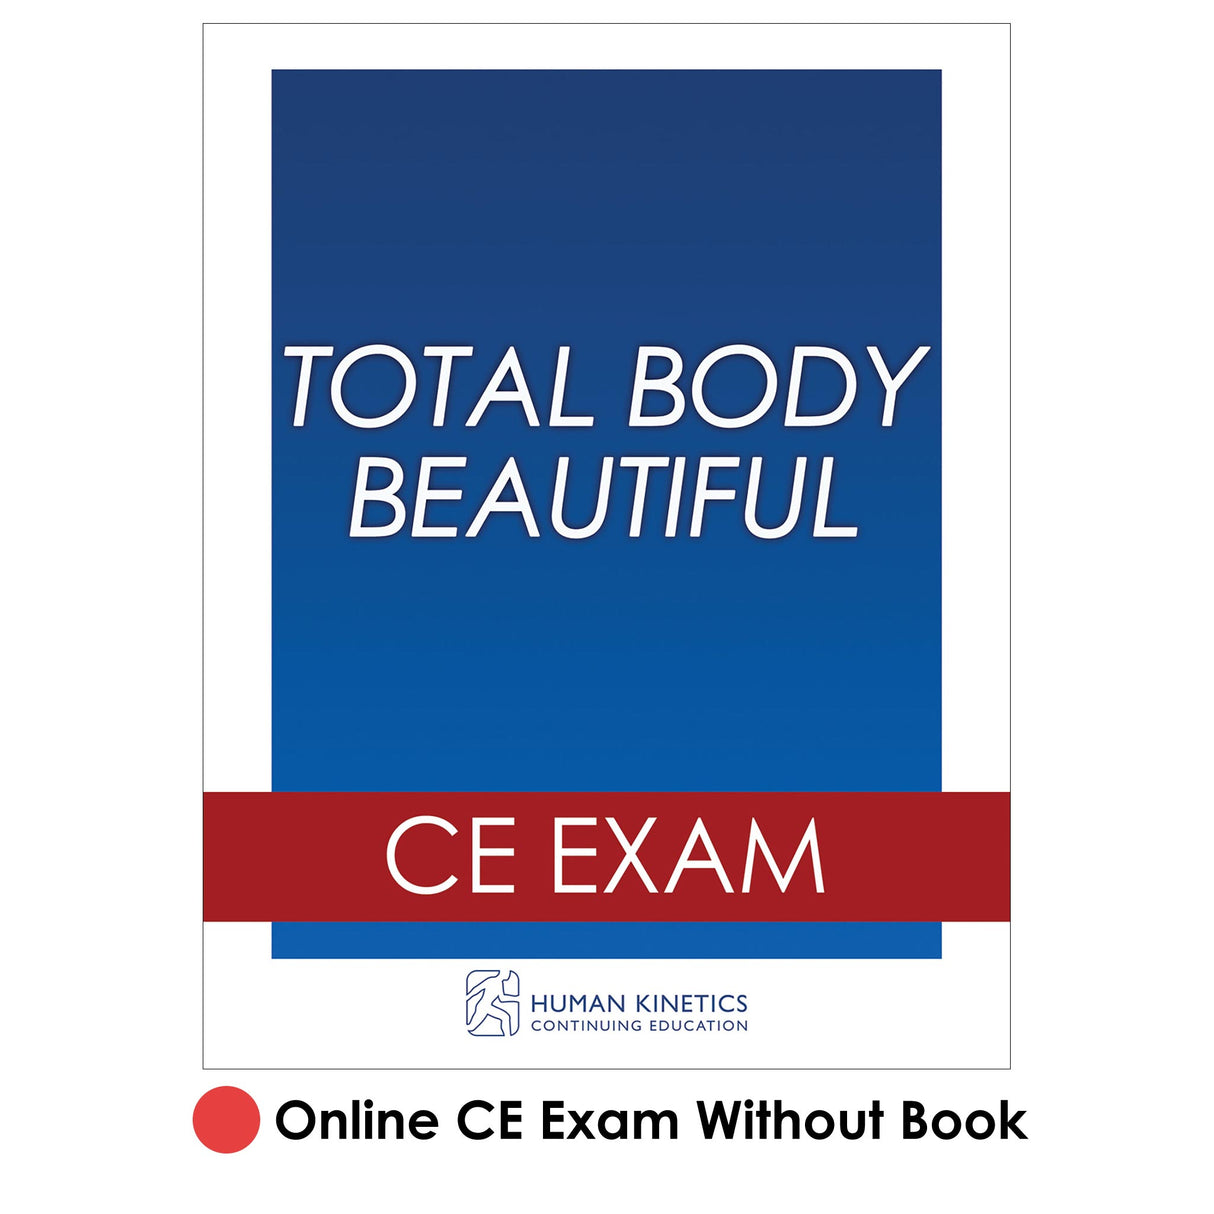 Total Body Beautiful Online CE Exam Without Book